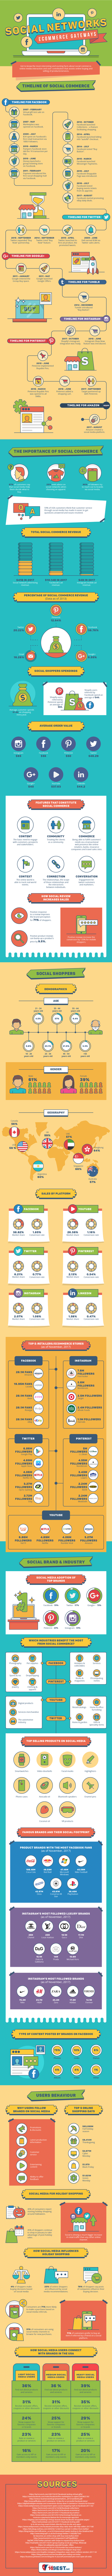 Infographic - Social Commerce